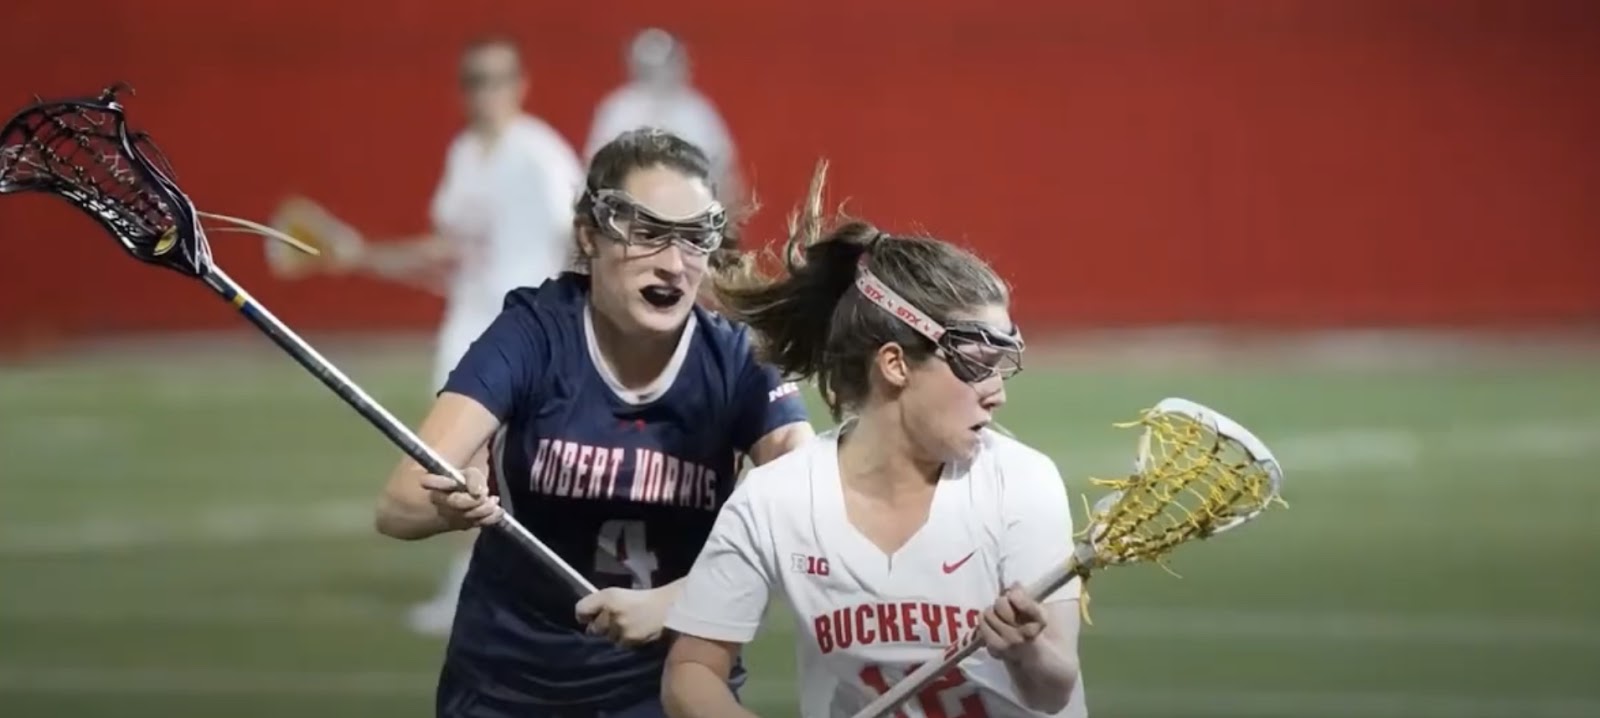 Is Lacrosse Dangerous? Assessing the Risks & Safety Measures